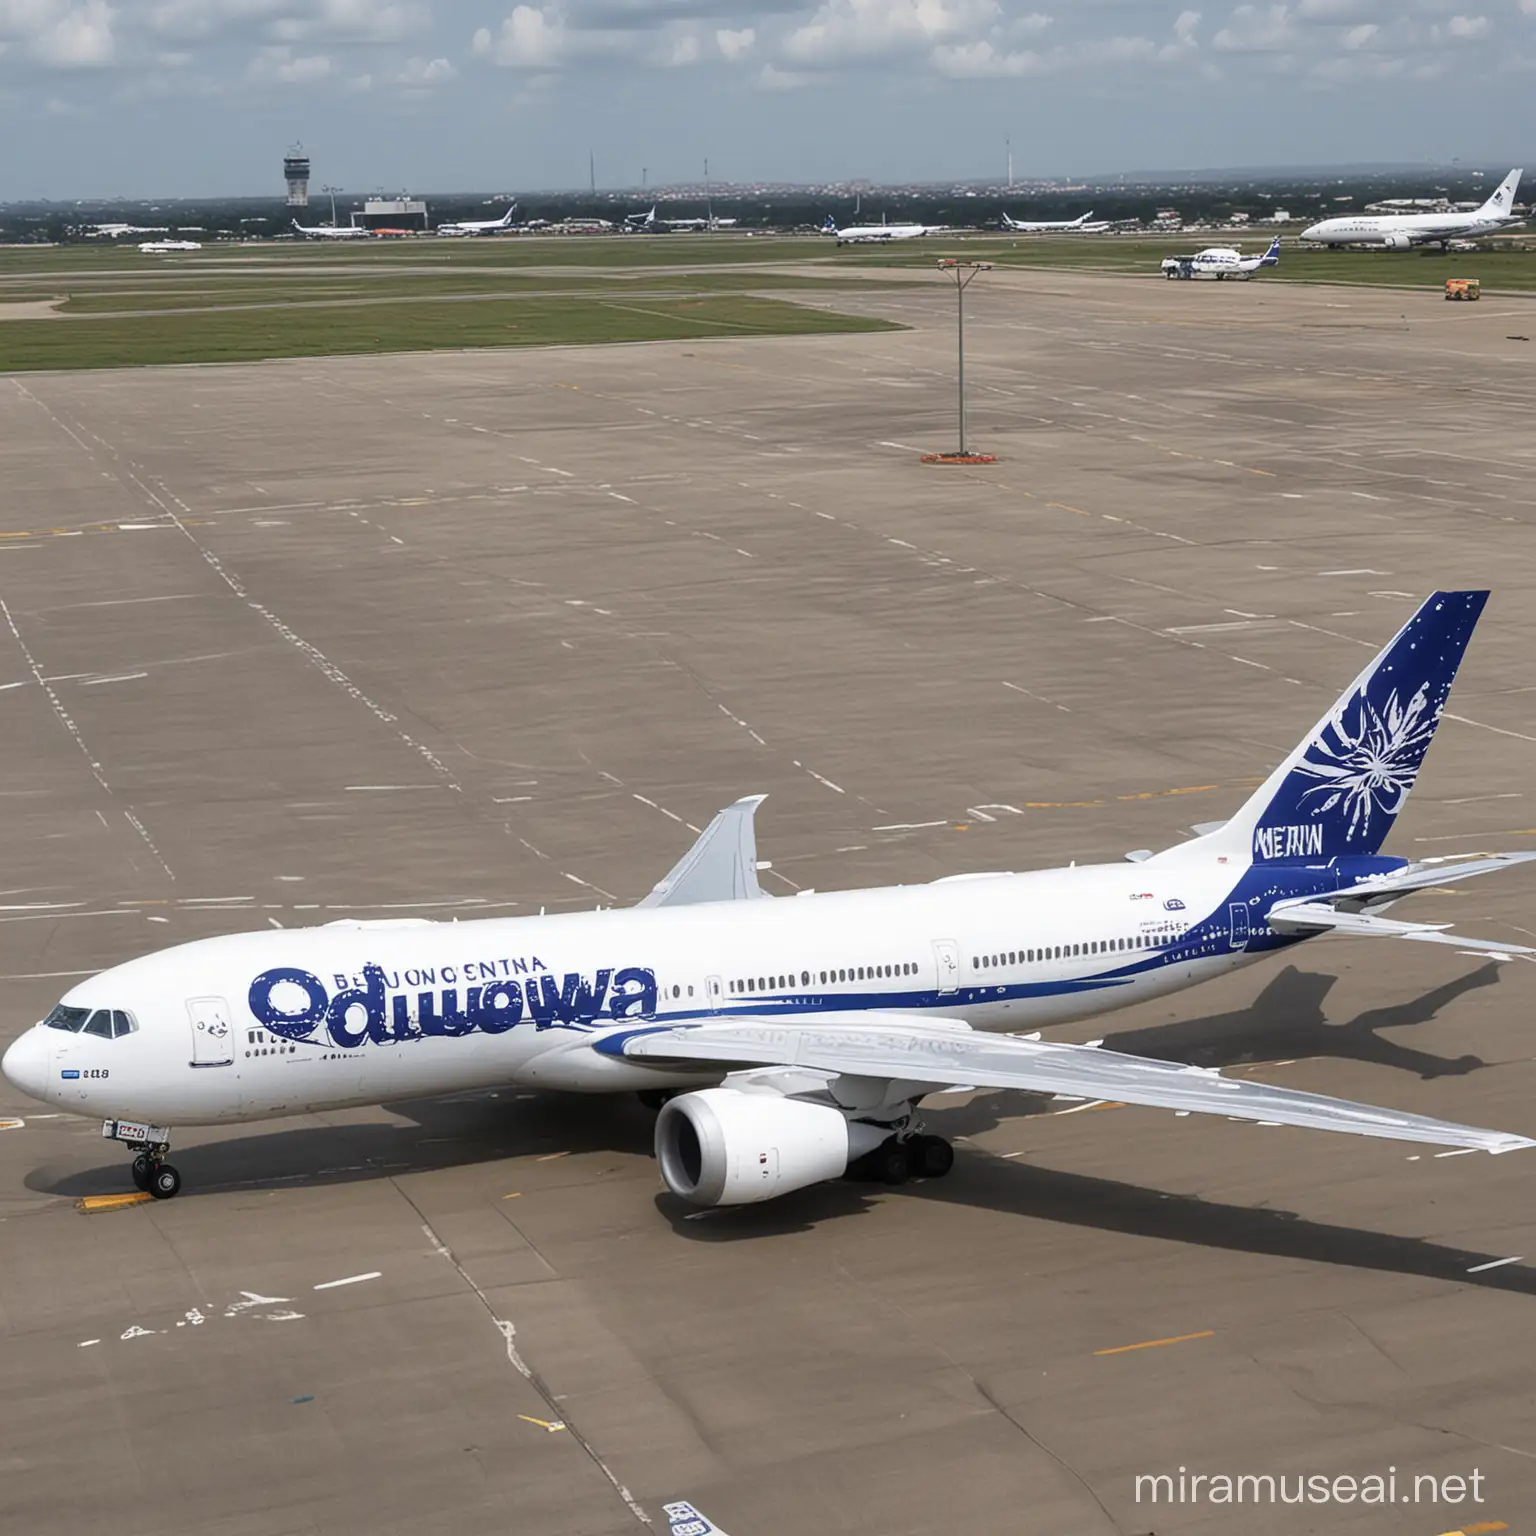 Oduduwa Nation Branded Boeing 767 on Blue and White Starry Runway